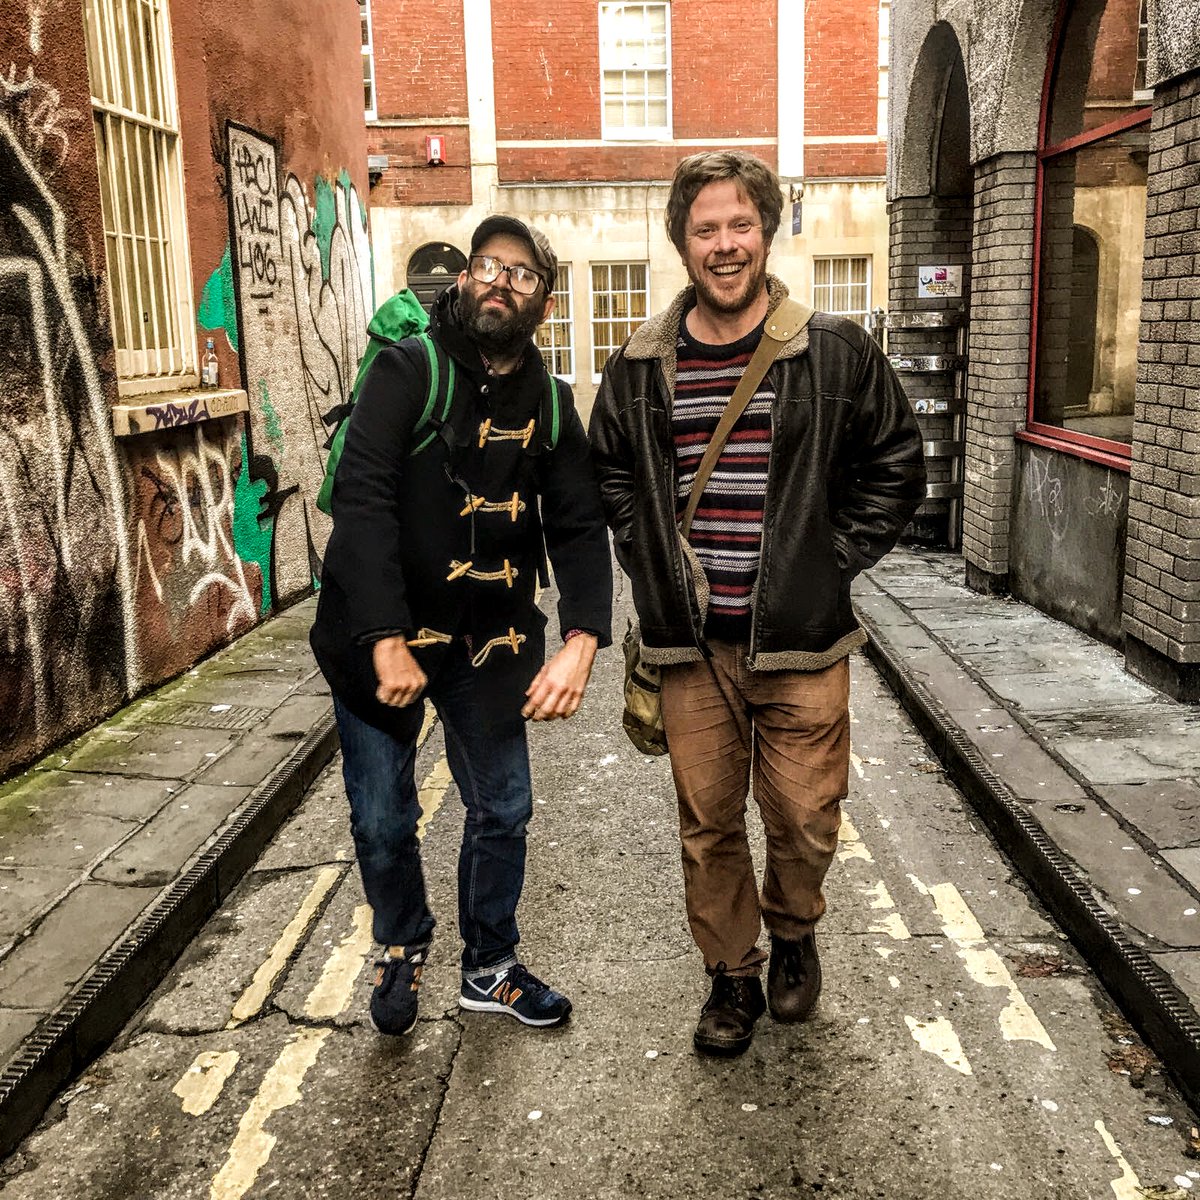 Exclusive performance for one night only The Ballad of Roger and Grace: DANIEL KITSON & GAVIN OSBORN | Sun 19 May A show of a lovely and funny story with beautiful and heart breaking songs. Book now at unionchapel.org.uk/venue/whats-on…